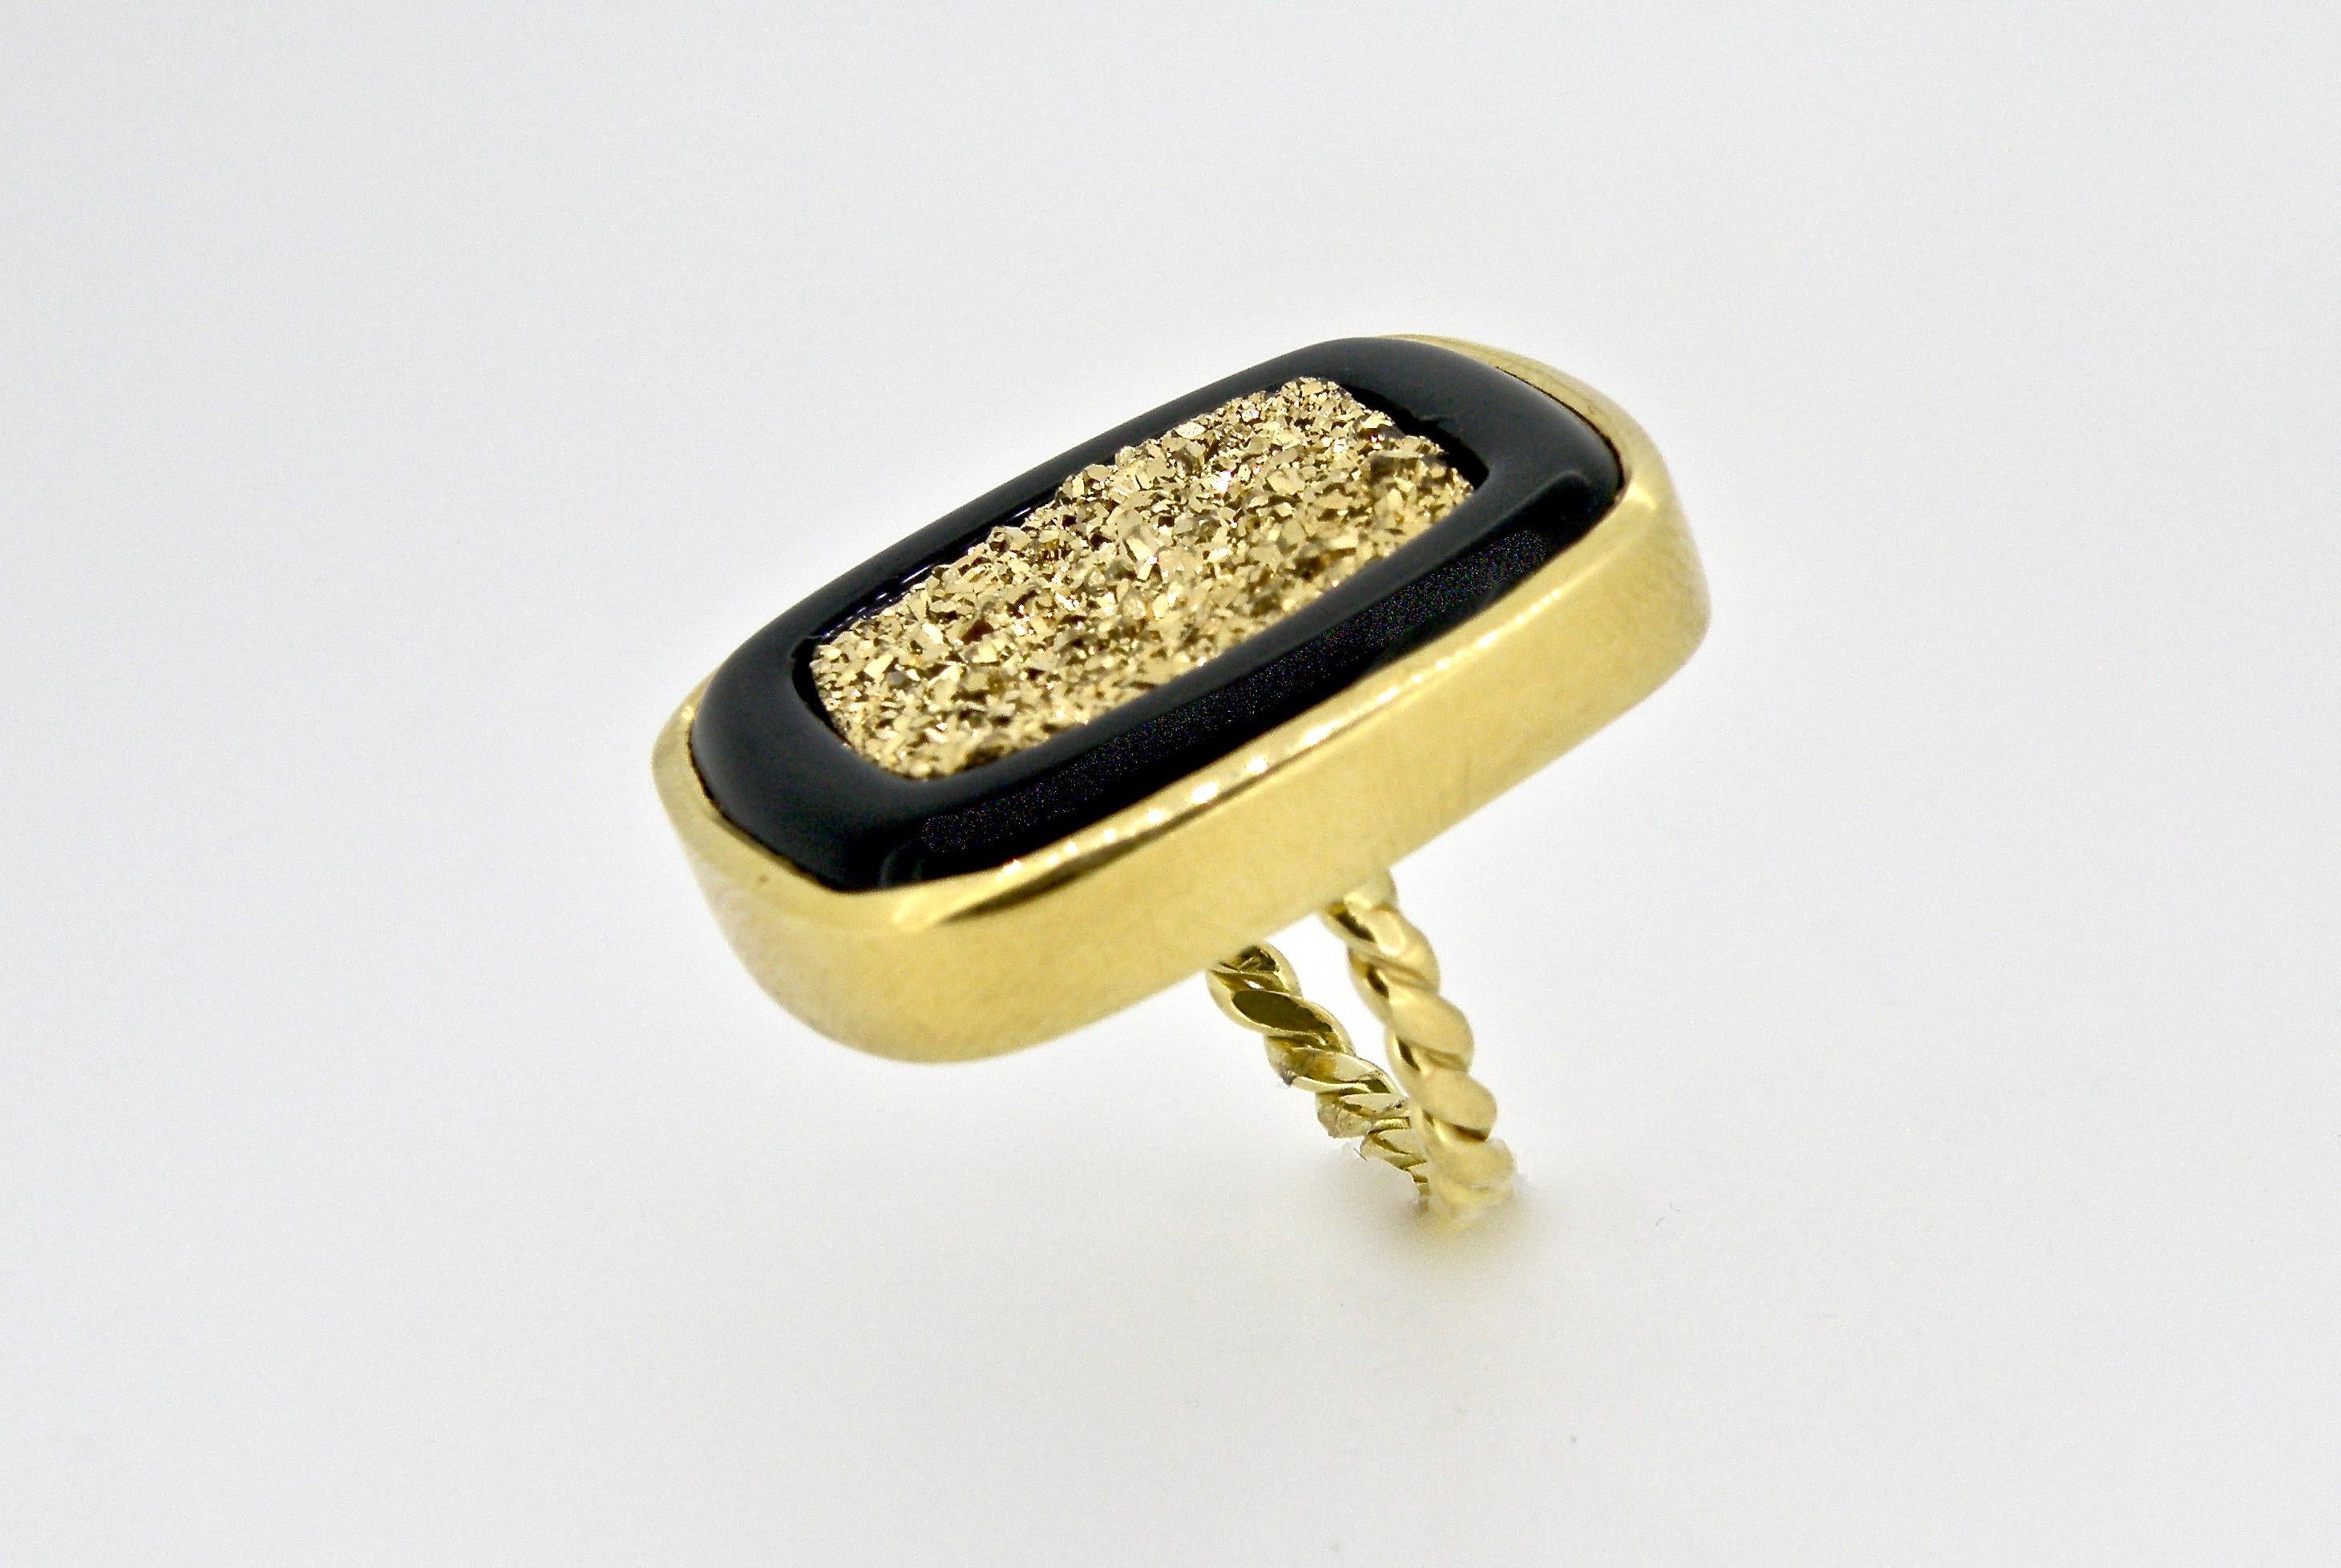 18K Gold Black Onyx Druzy Ring with twisted gold band